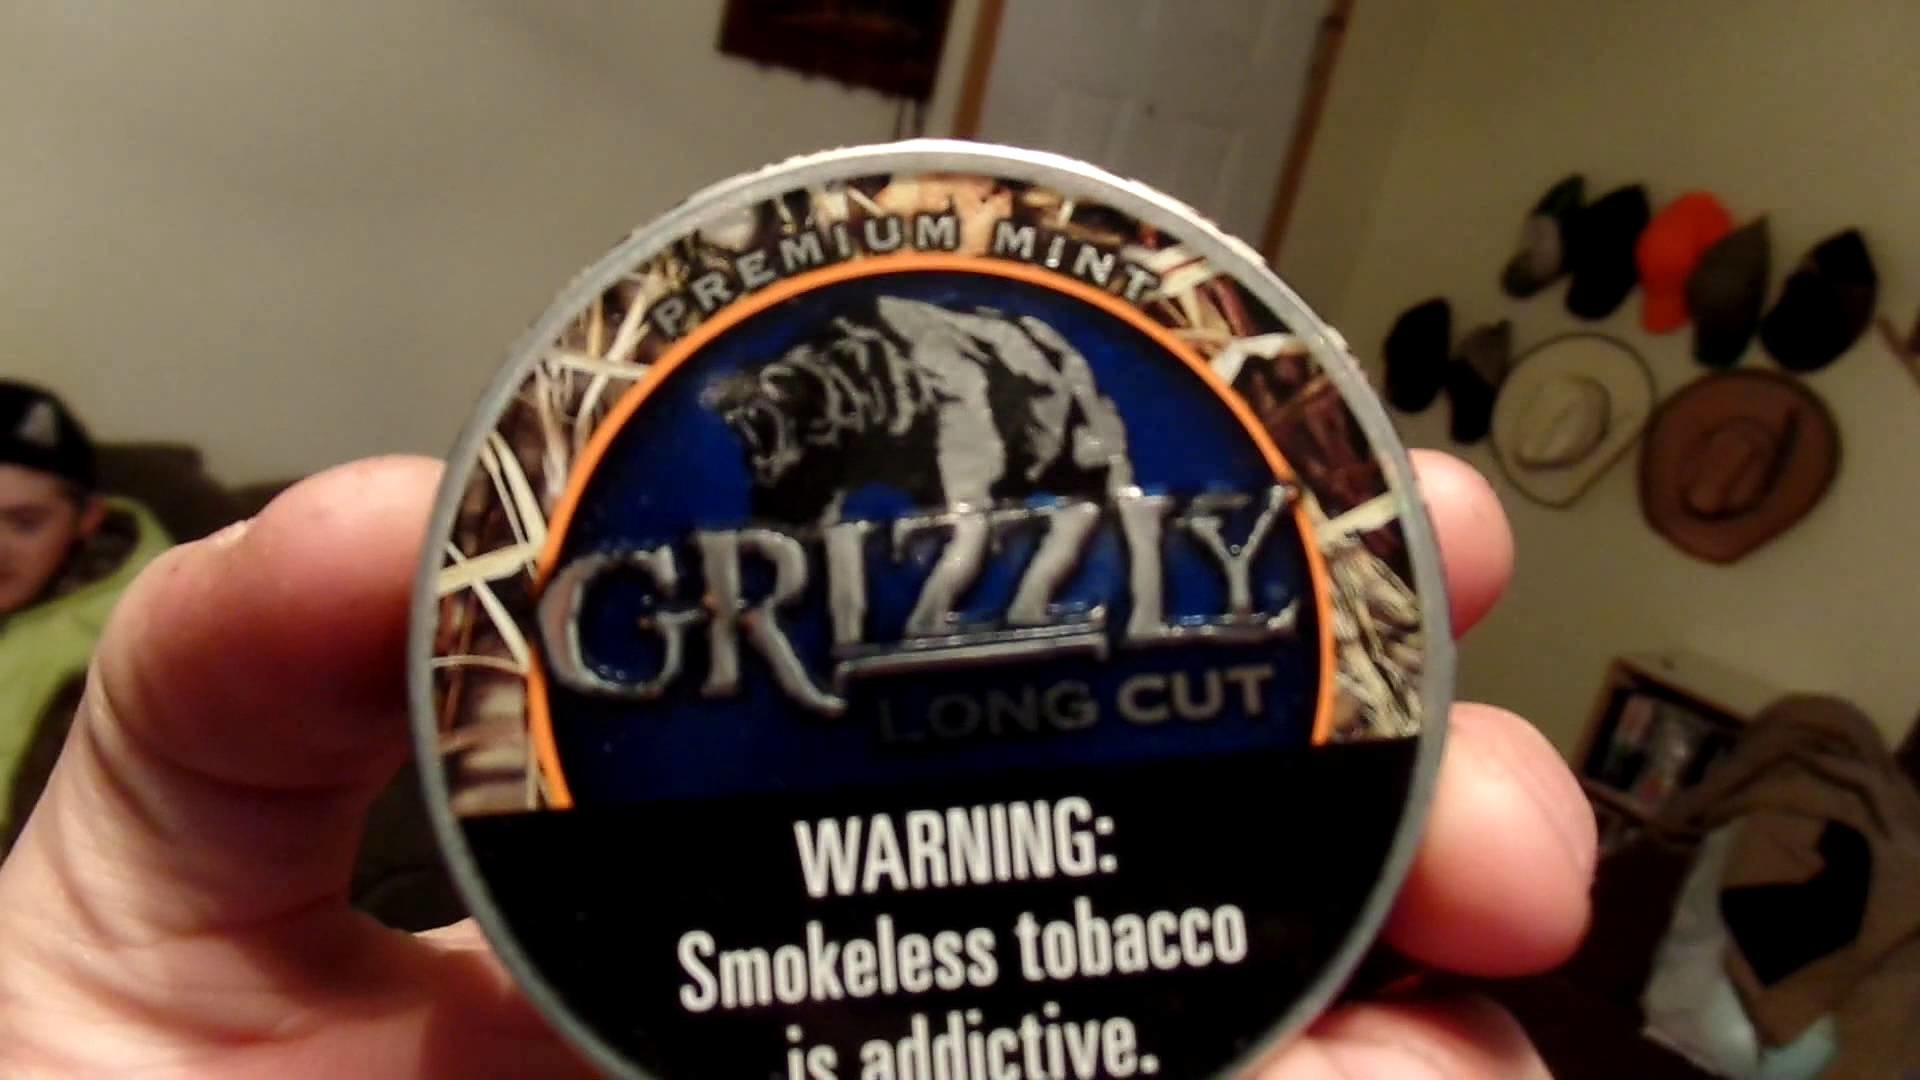 Grizzly camo mint vlog